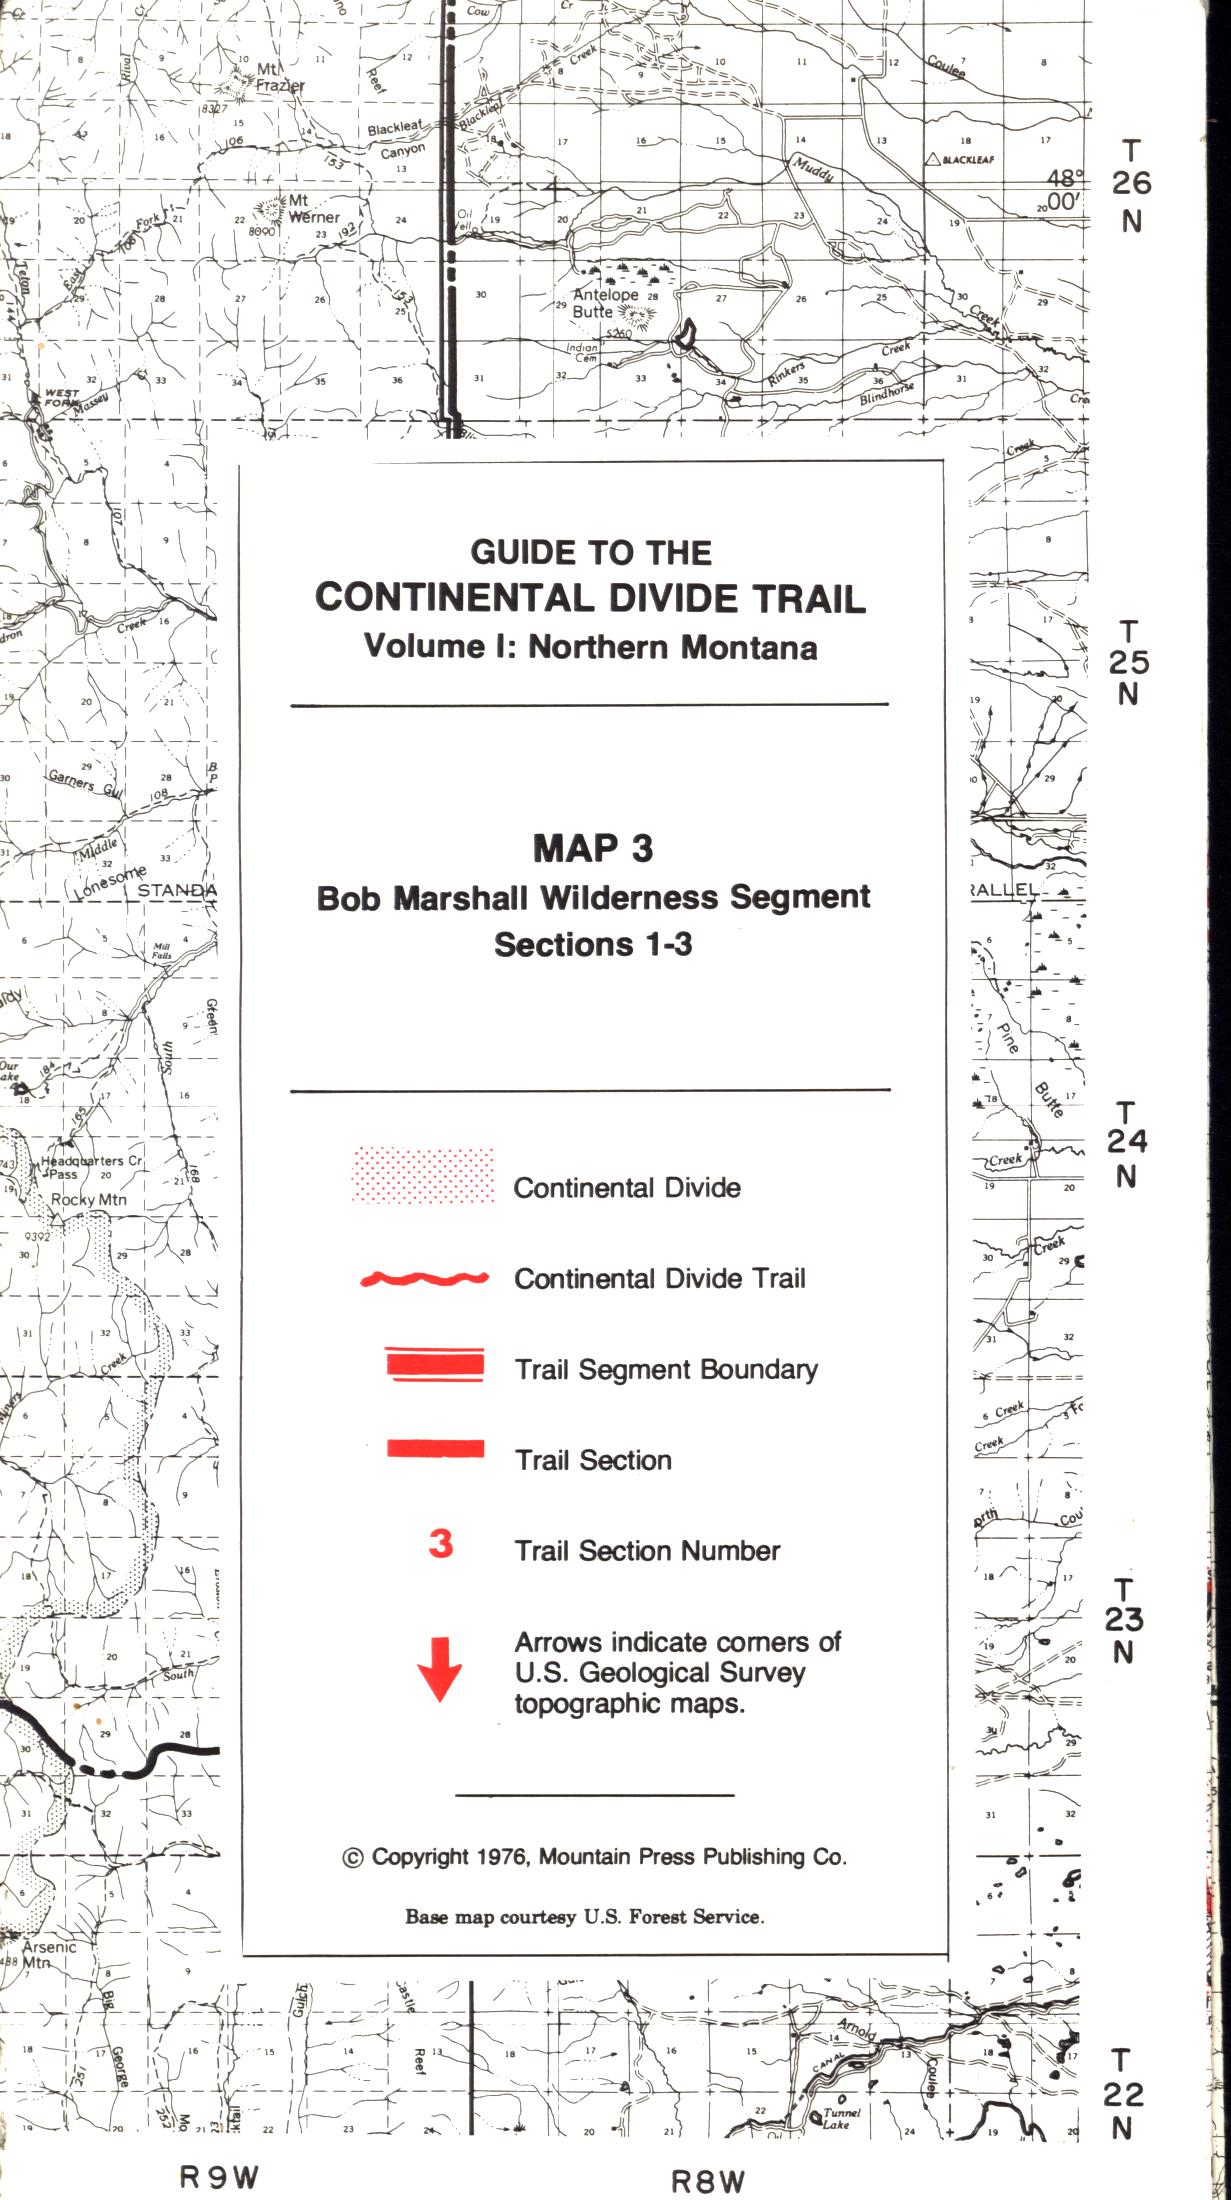 GUIDE TO THE CONTINENTAL DIVIDE TRAIL: Volume I, Northern Montana (Maps 4 and 5). 